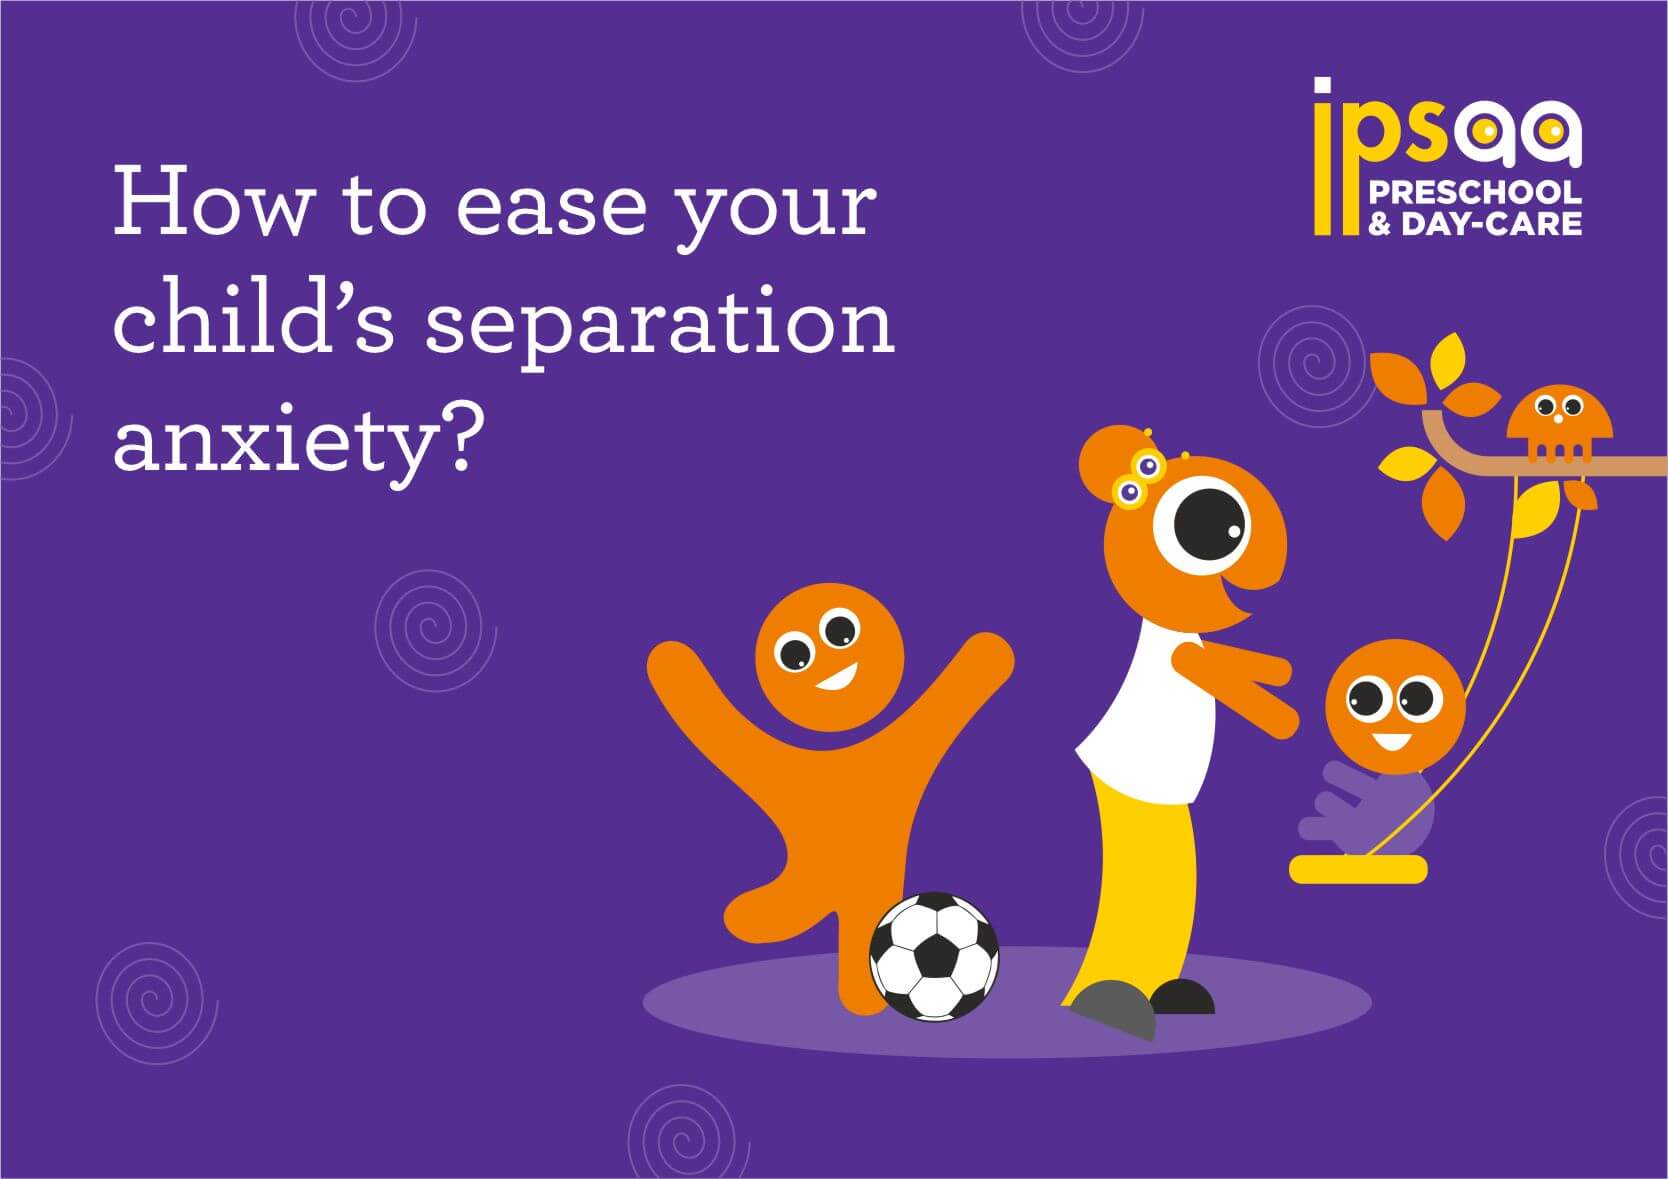 How to ease your child’s separation anxiety?